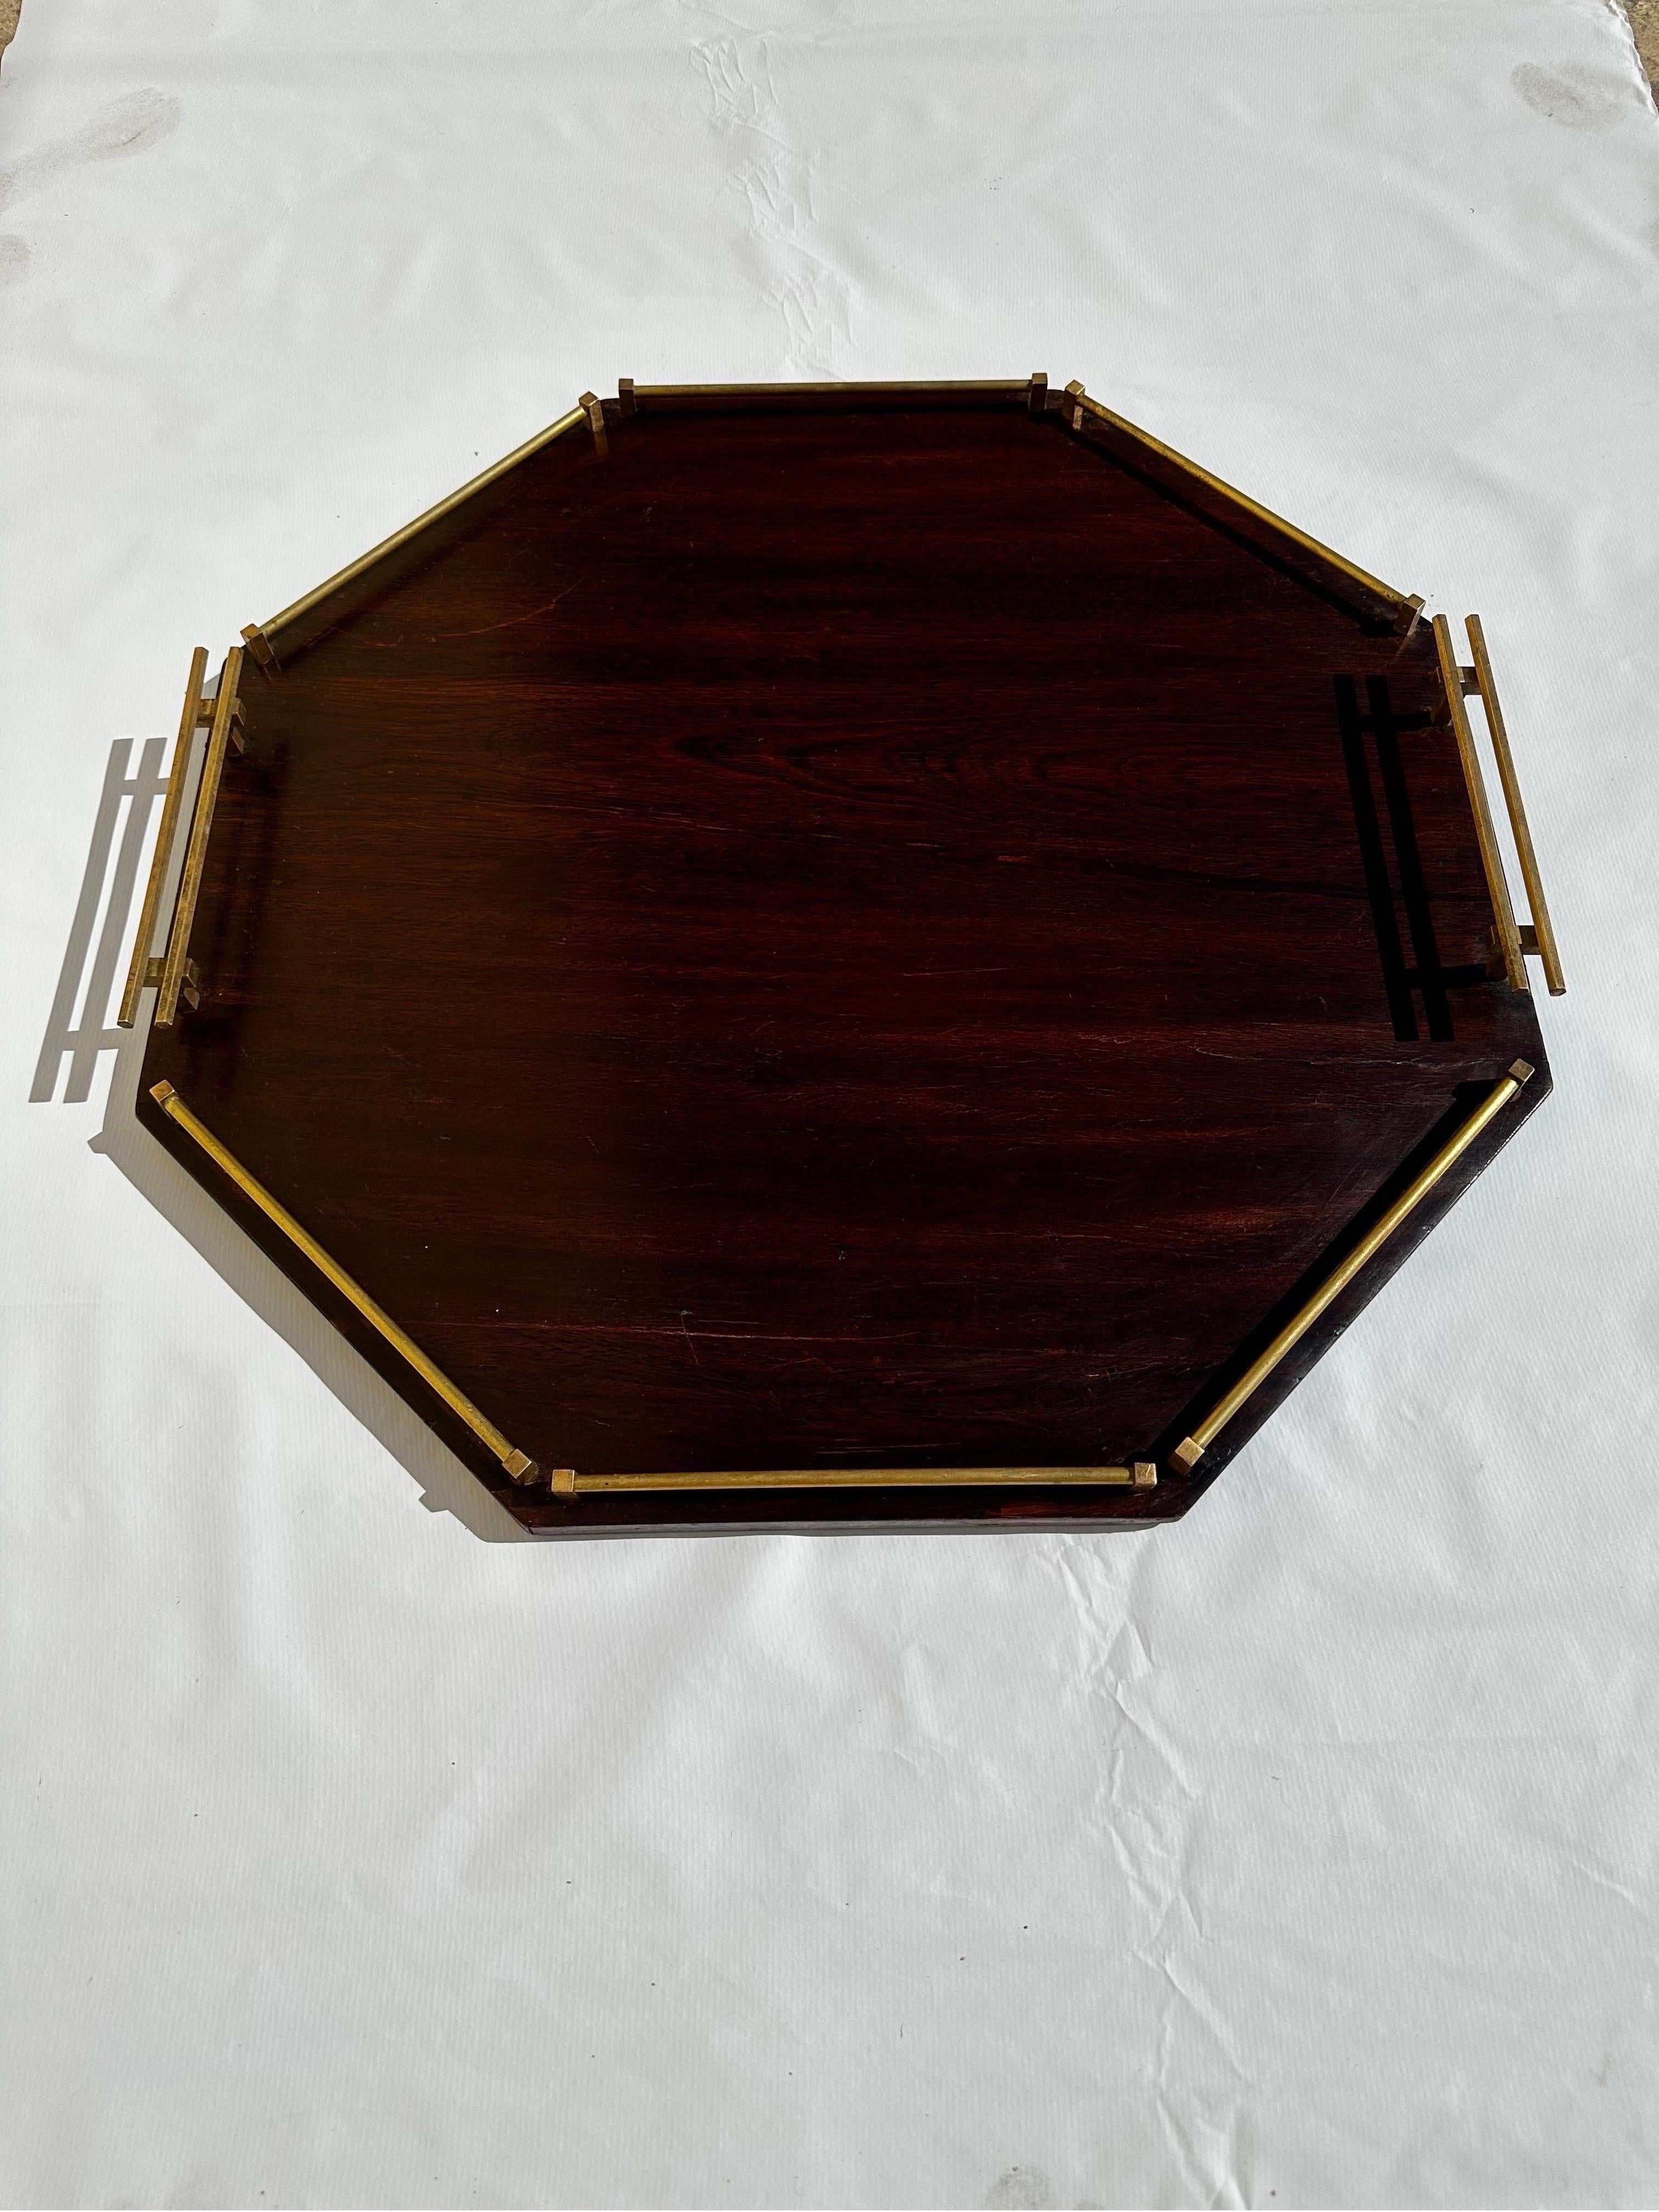 Brazilian Midcentury Jacarandá Rosewood and Brass Serving Tray, 1960s In Good Condition For Sale In Miami, FL